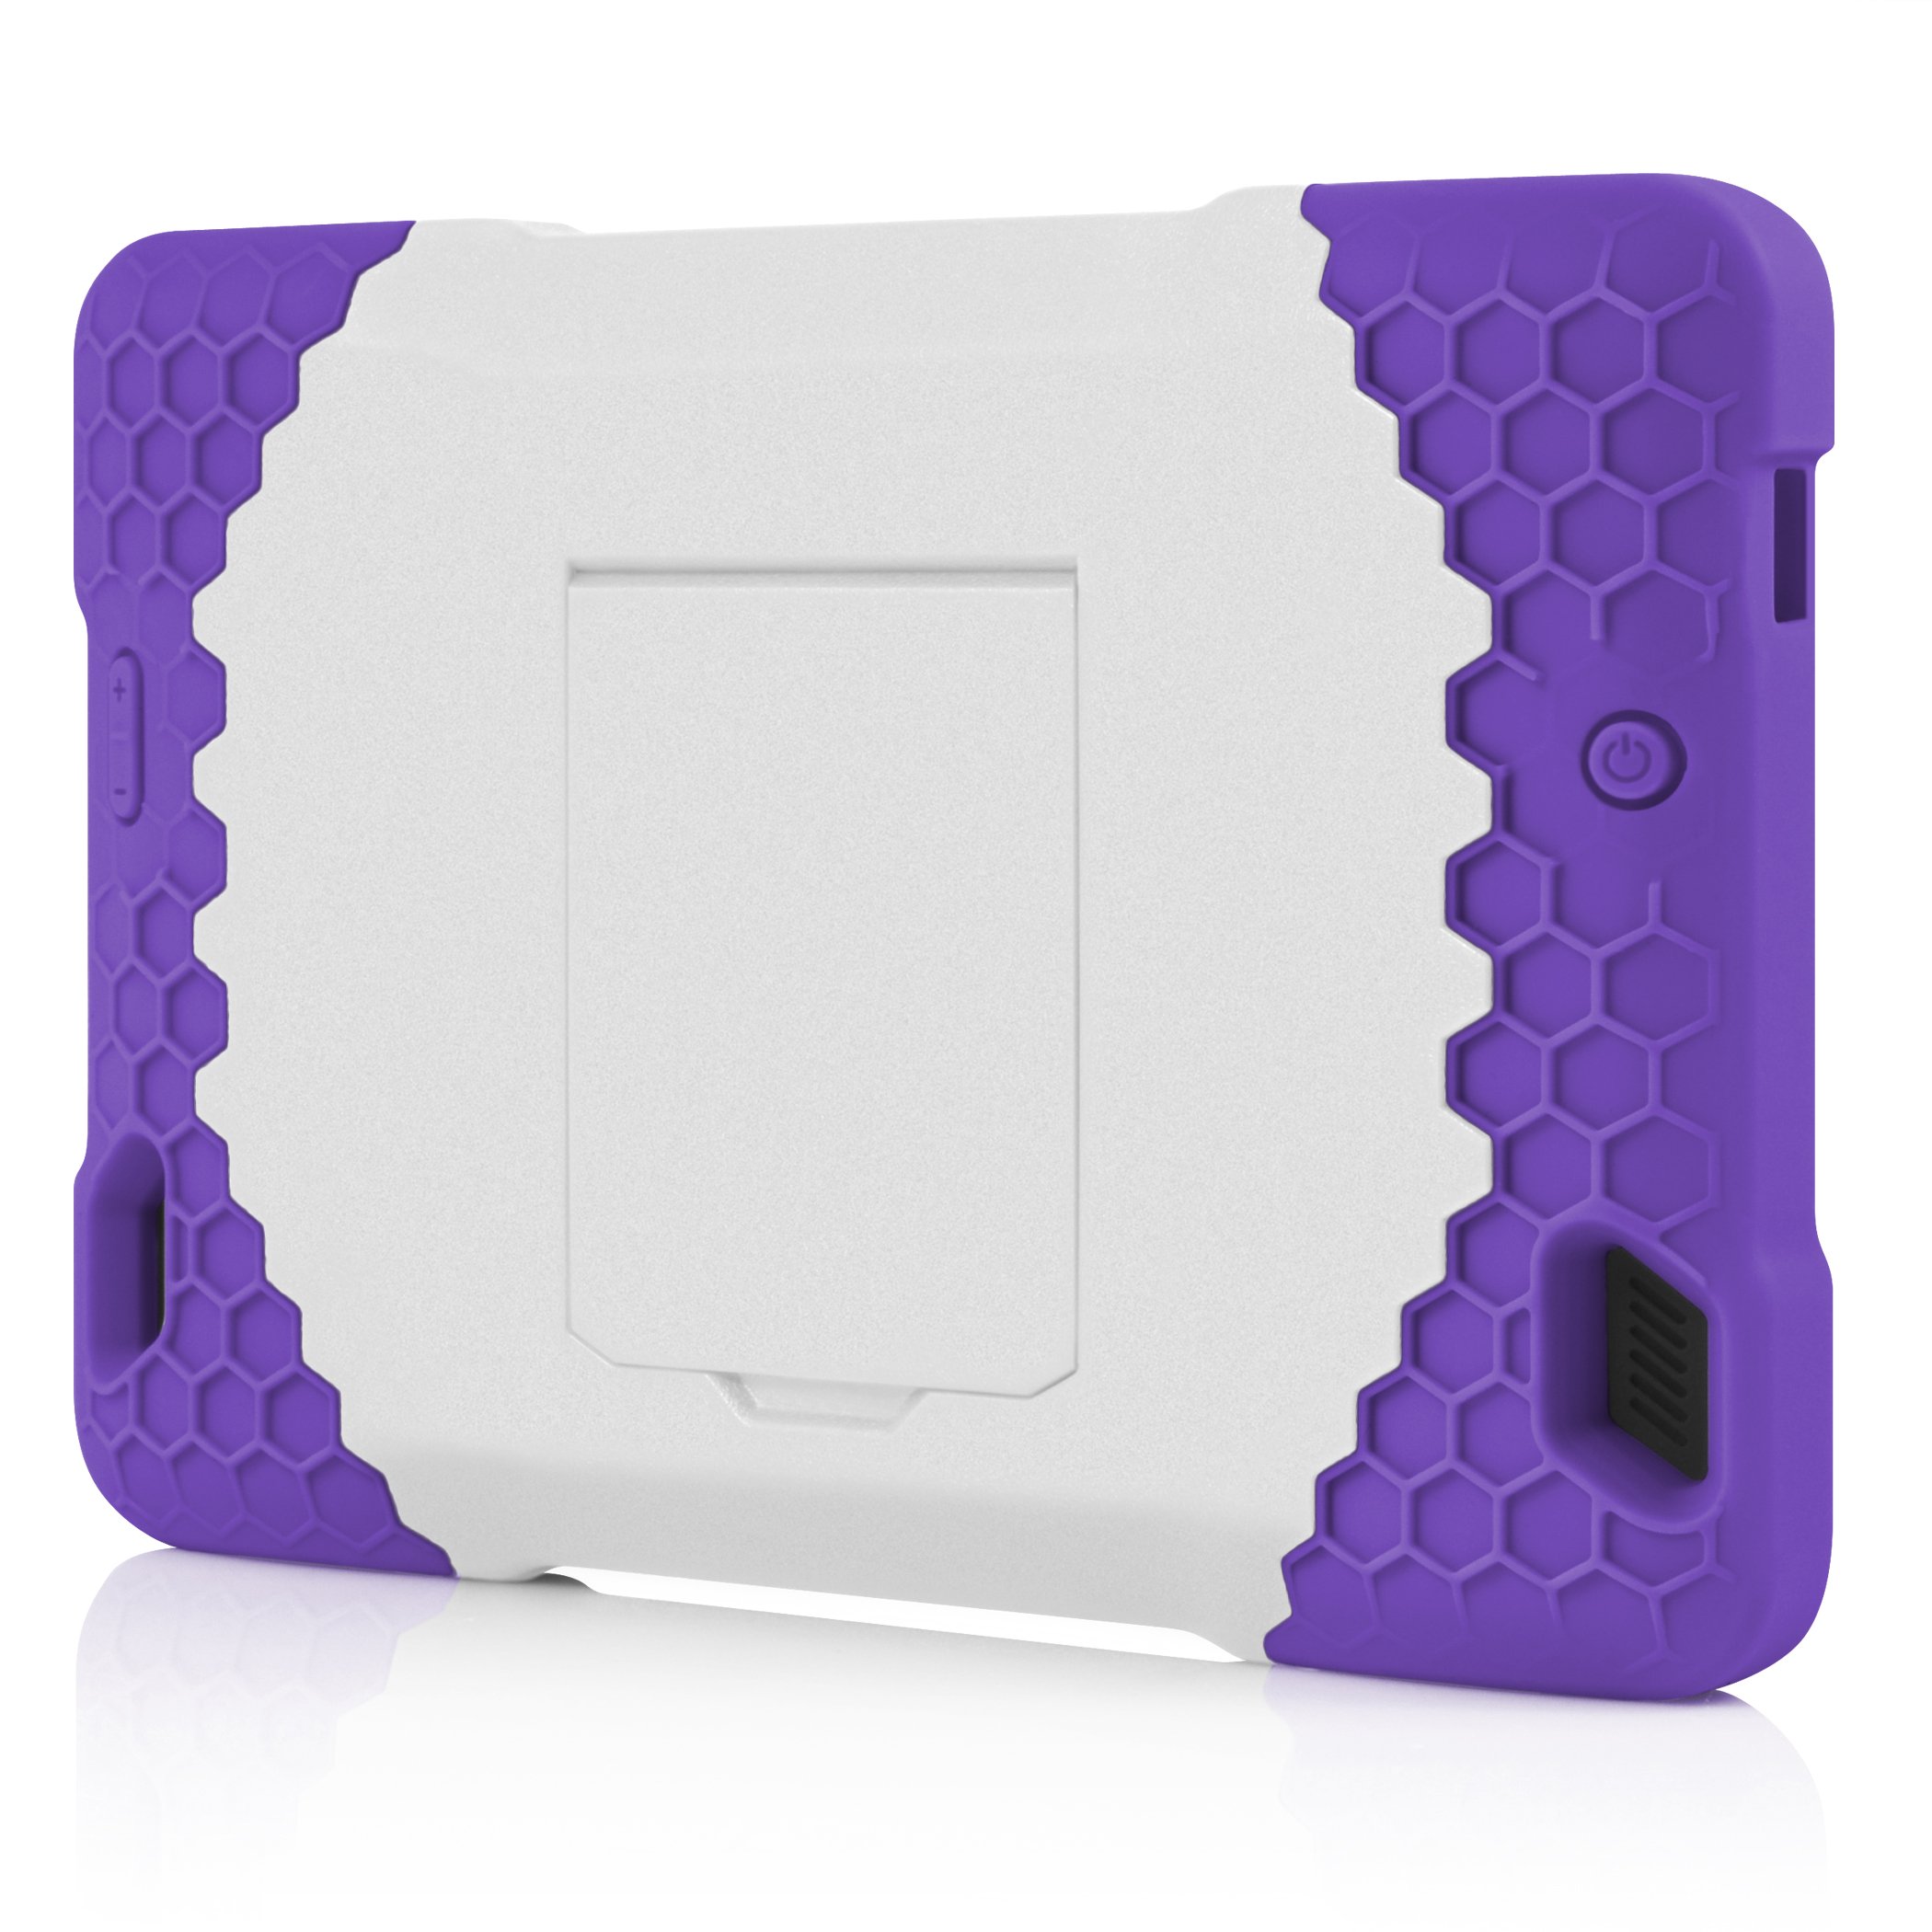 Incipio Hive Response Standing Case for the Kindle Fire HD, Purple (will only fit 3rd generation)